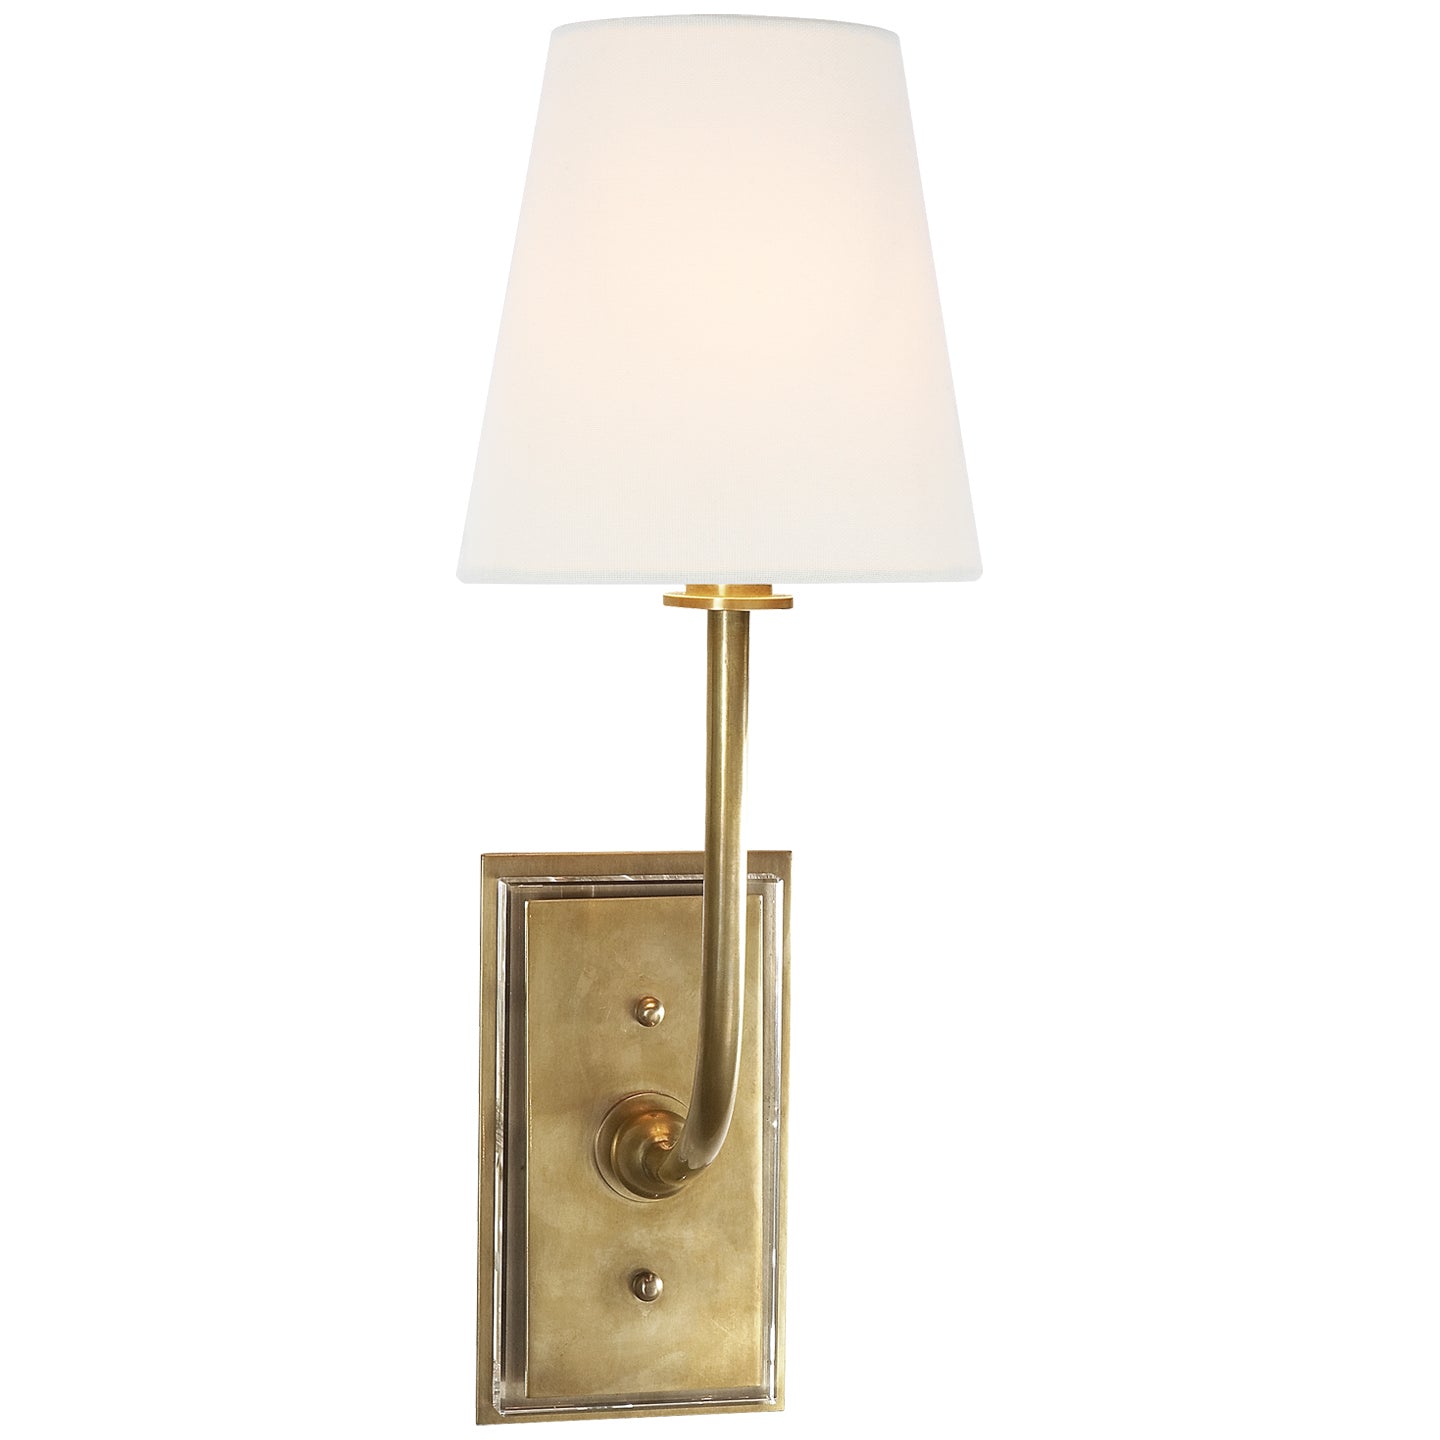 Visual Comfort Signature - TOB 2190HAB-L - One Light Wall Sconce - Hulton - Hand-Rubbed Antique Brass